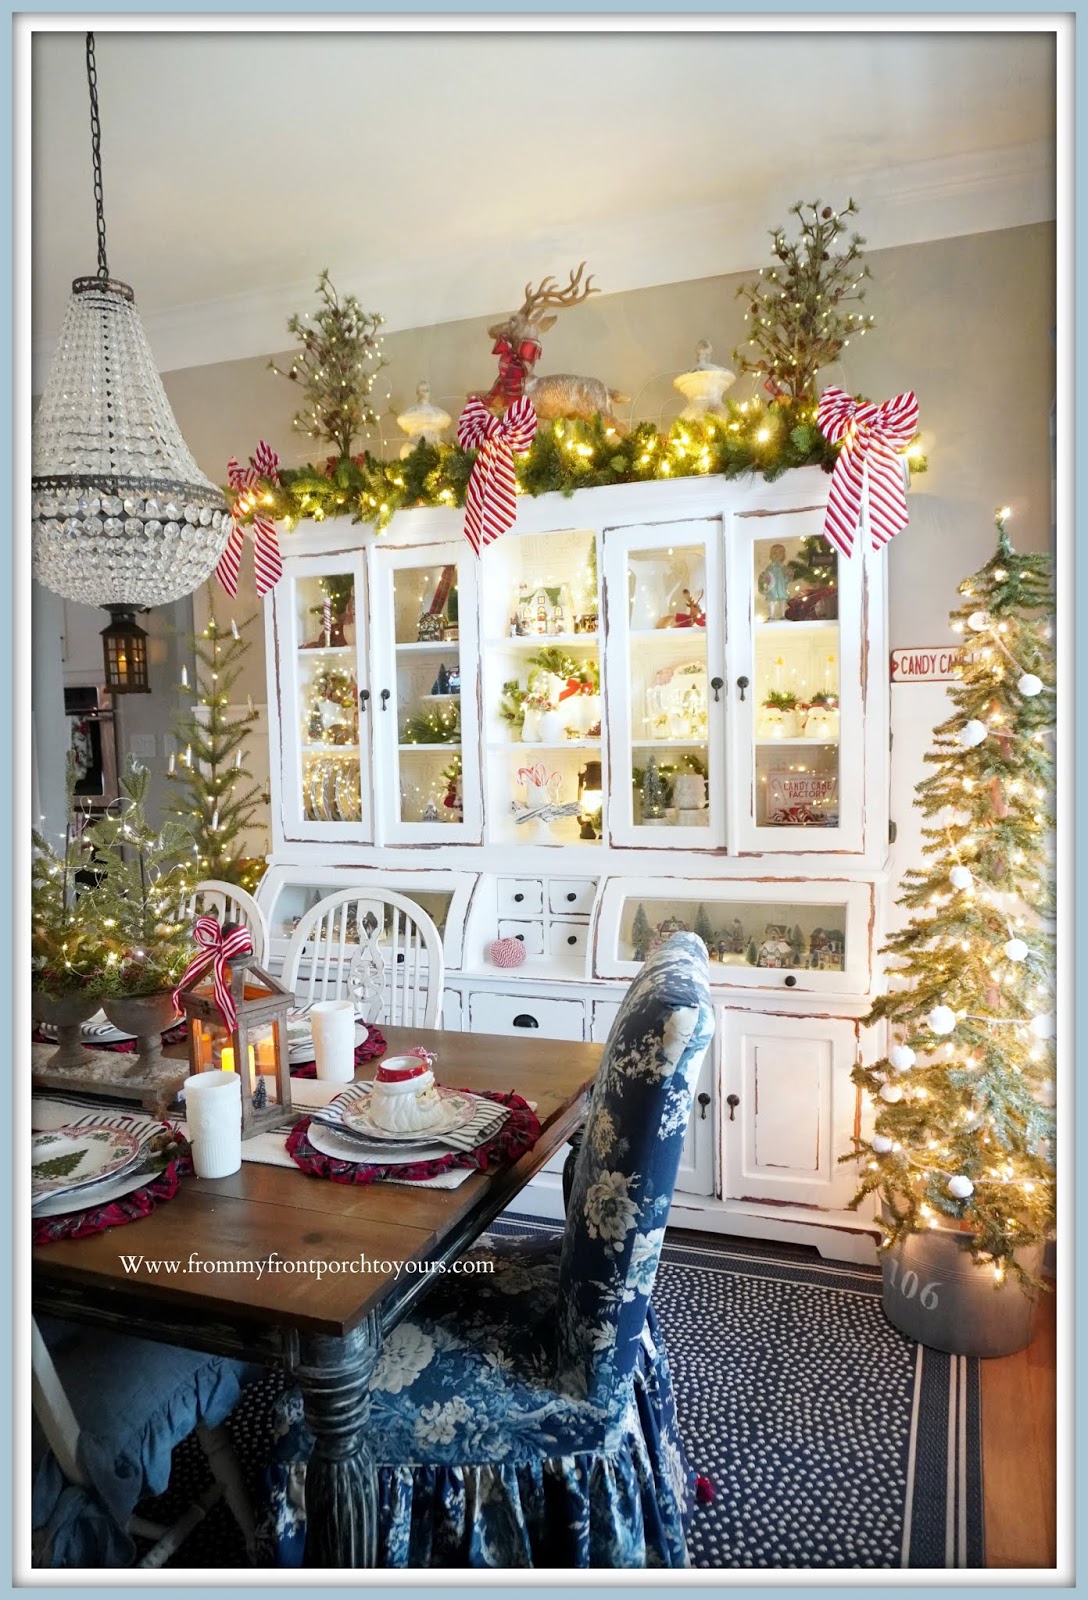 From My Front Porch To Yours: Cottage Farmhouse Christmas Dining Room